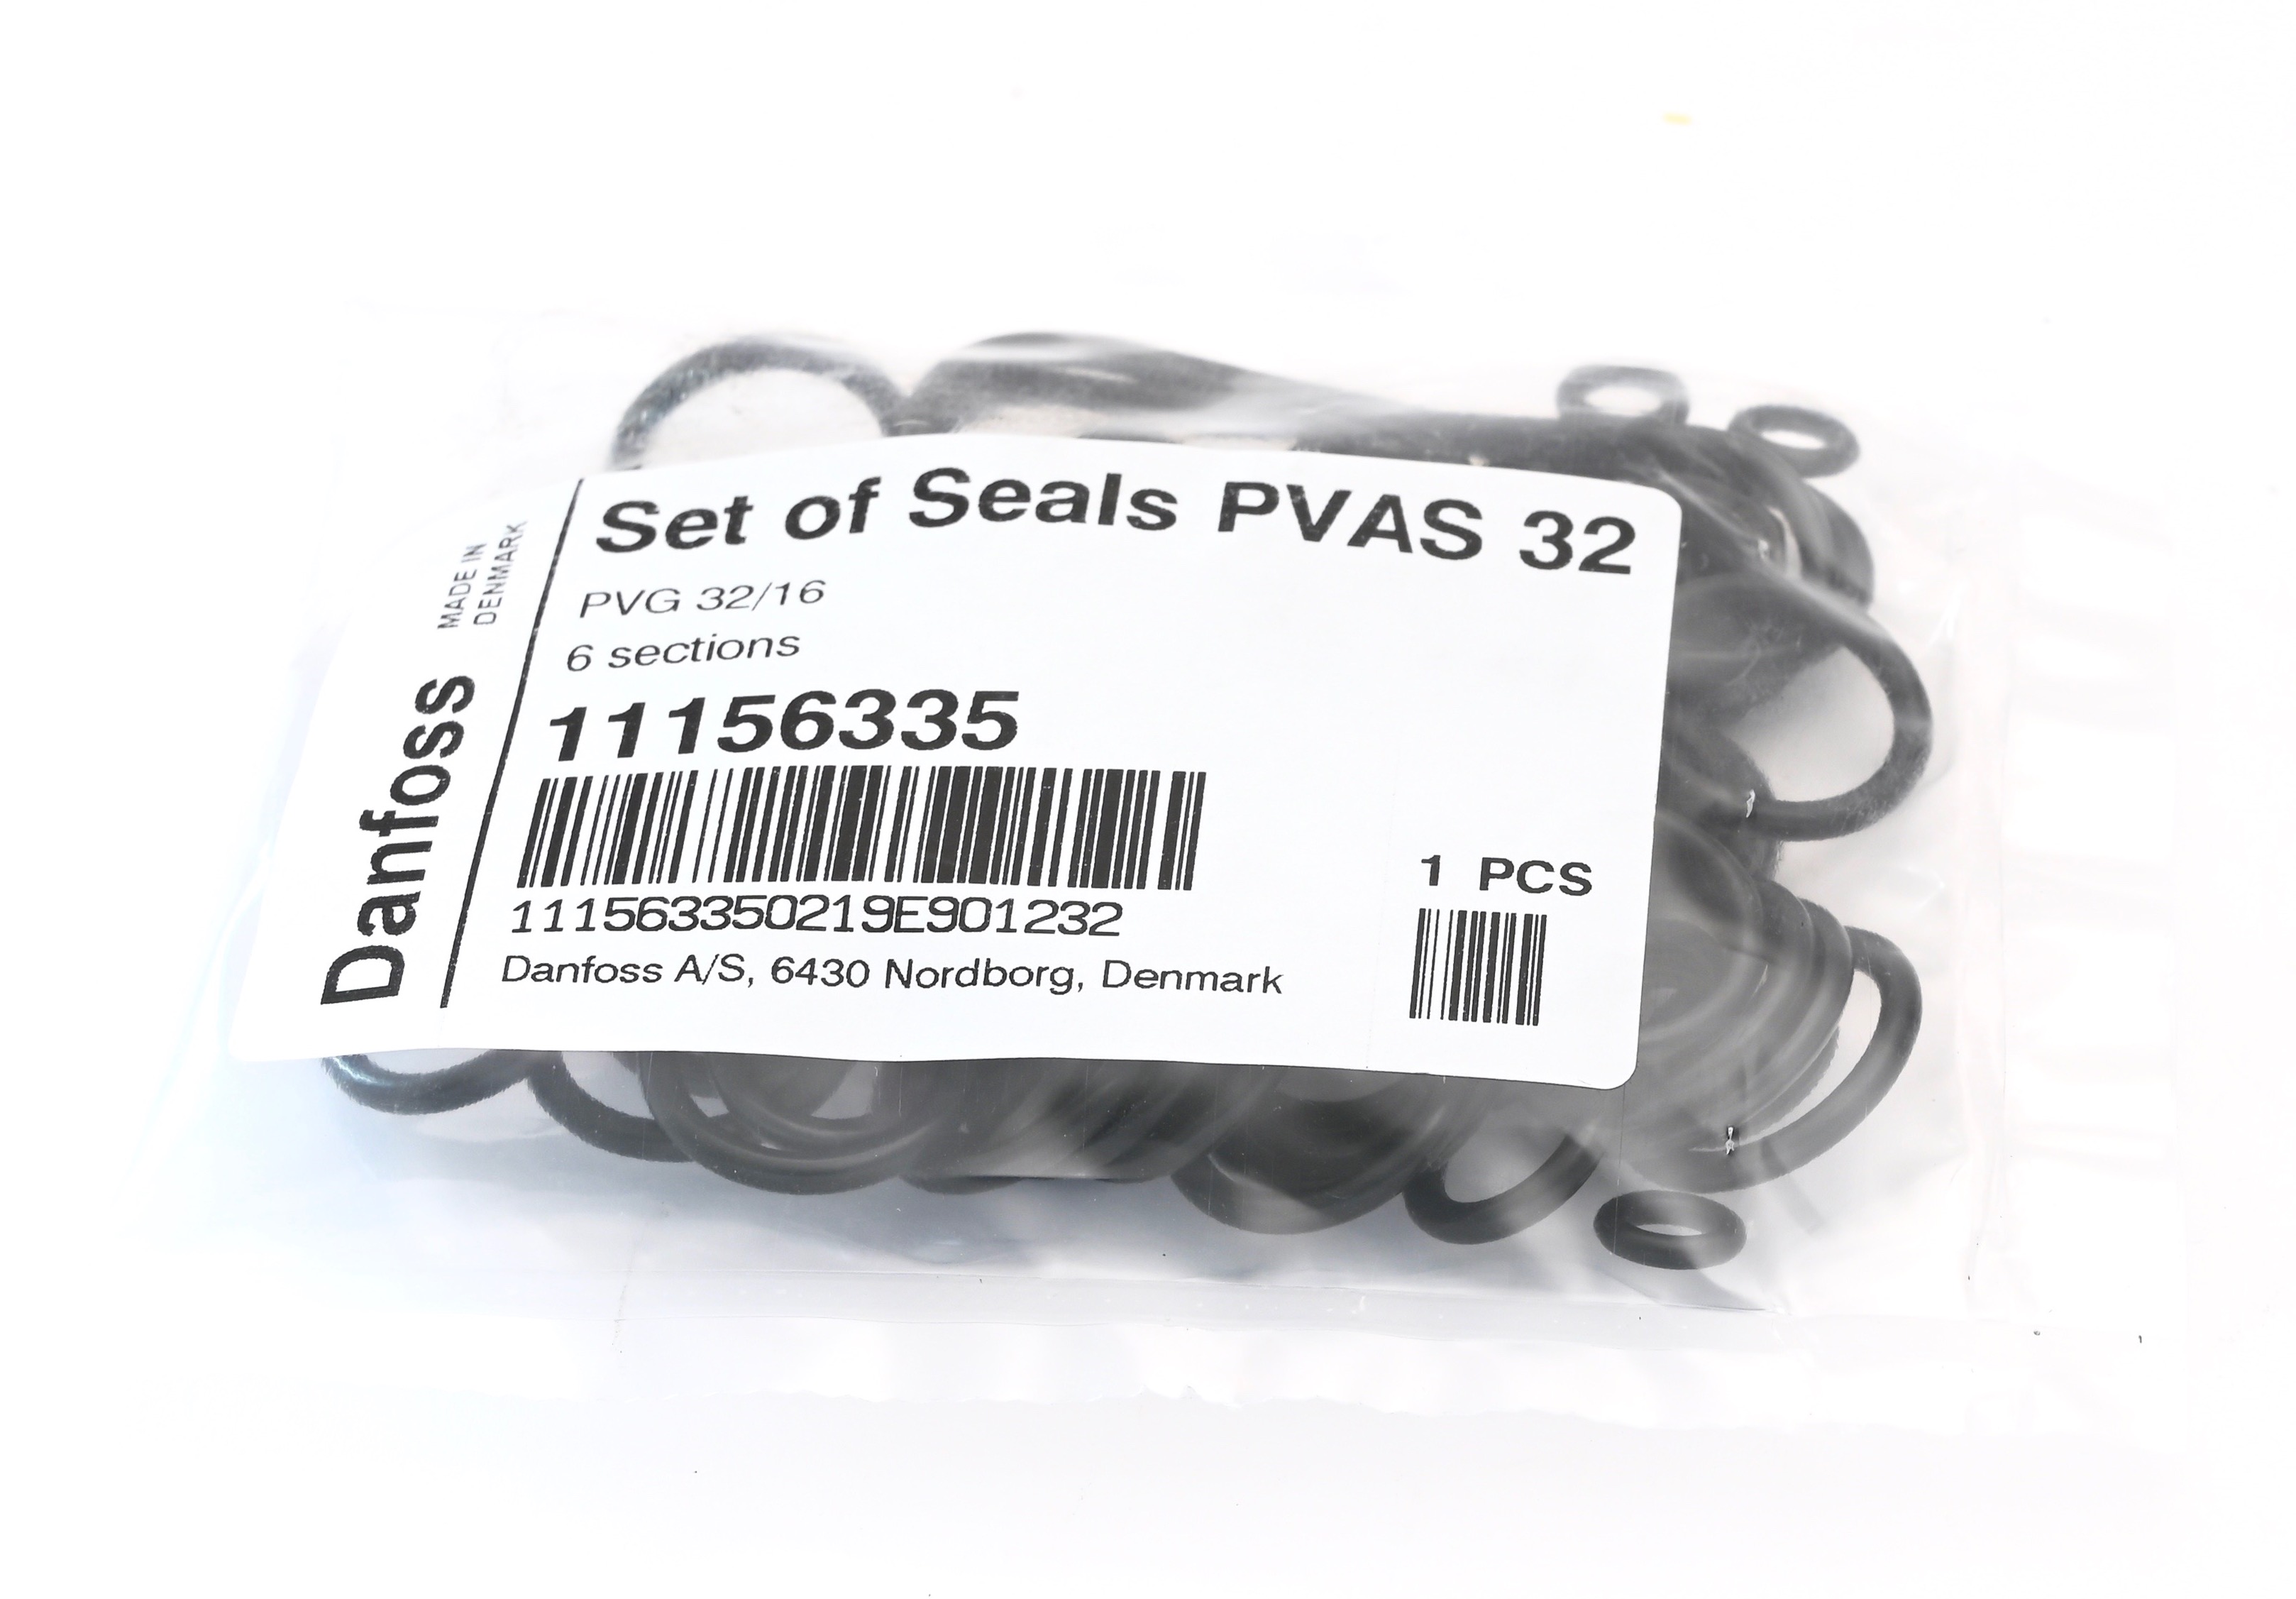 Danfoss 11156335 PVAS set of seals for PVG 32 with 1-6 sections 